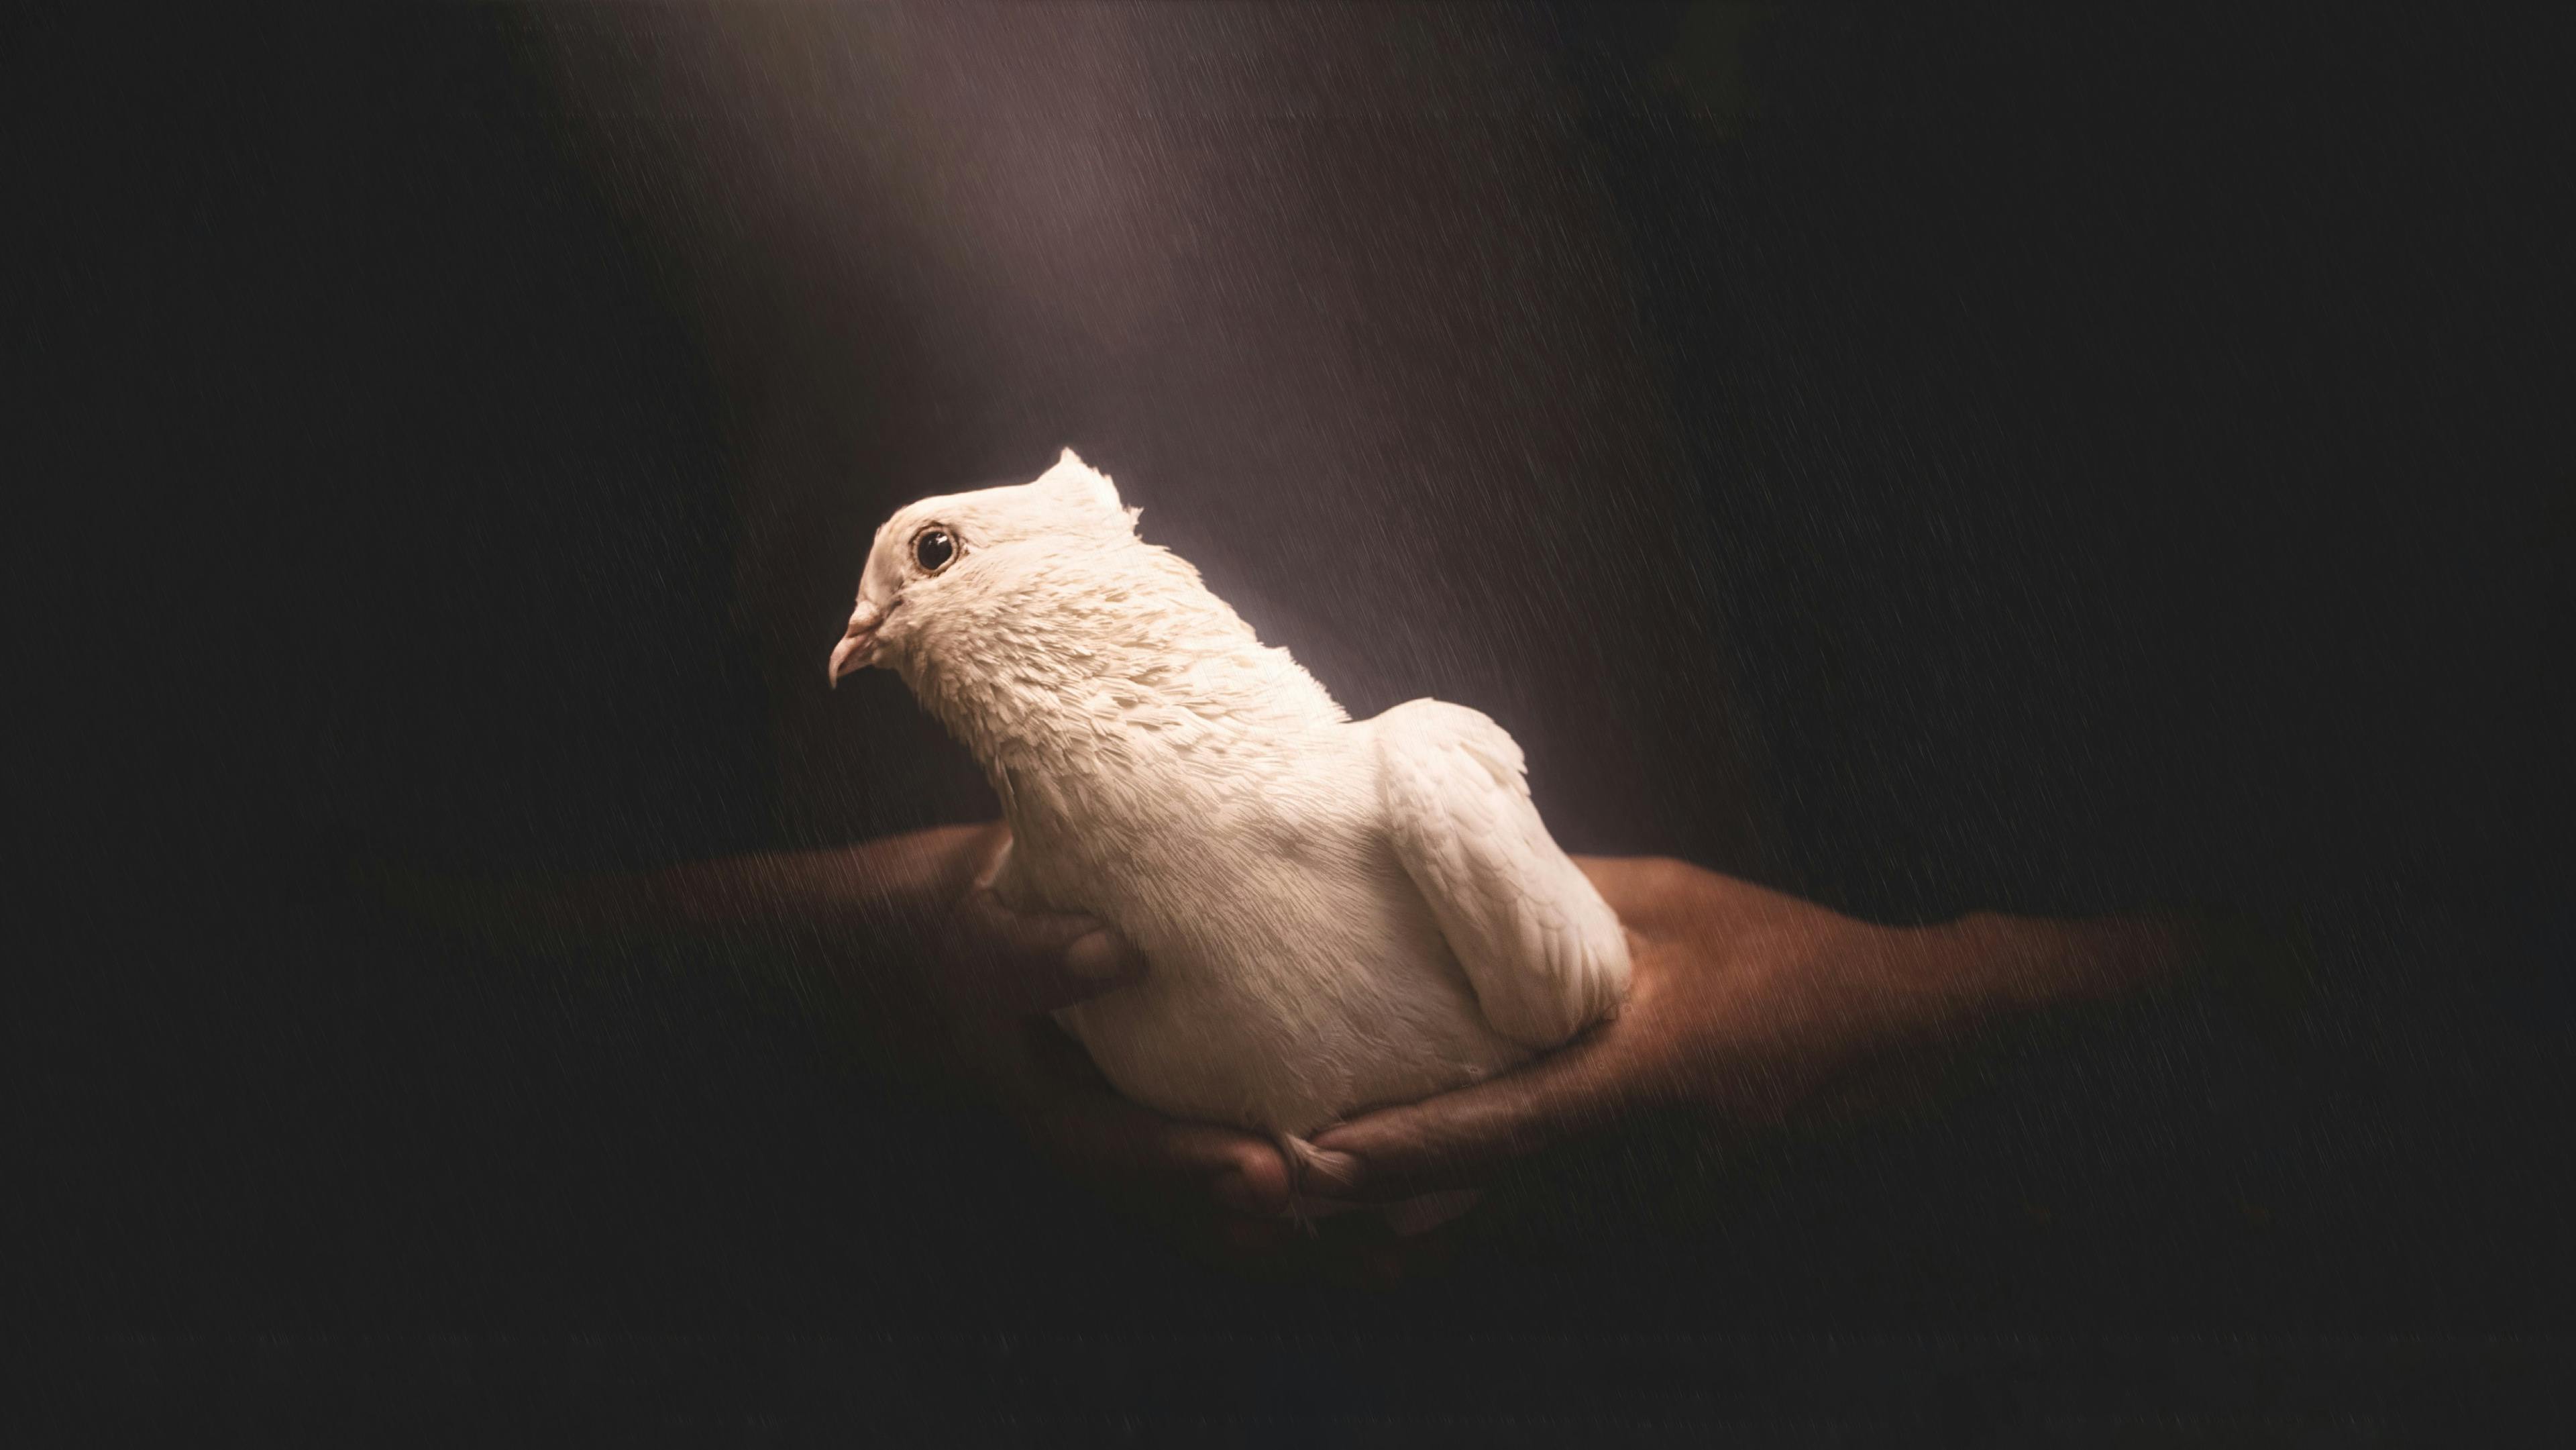 Photo of a dove being held by two hands, by Nowshad Arefin on Unsplash